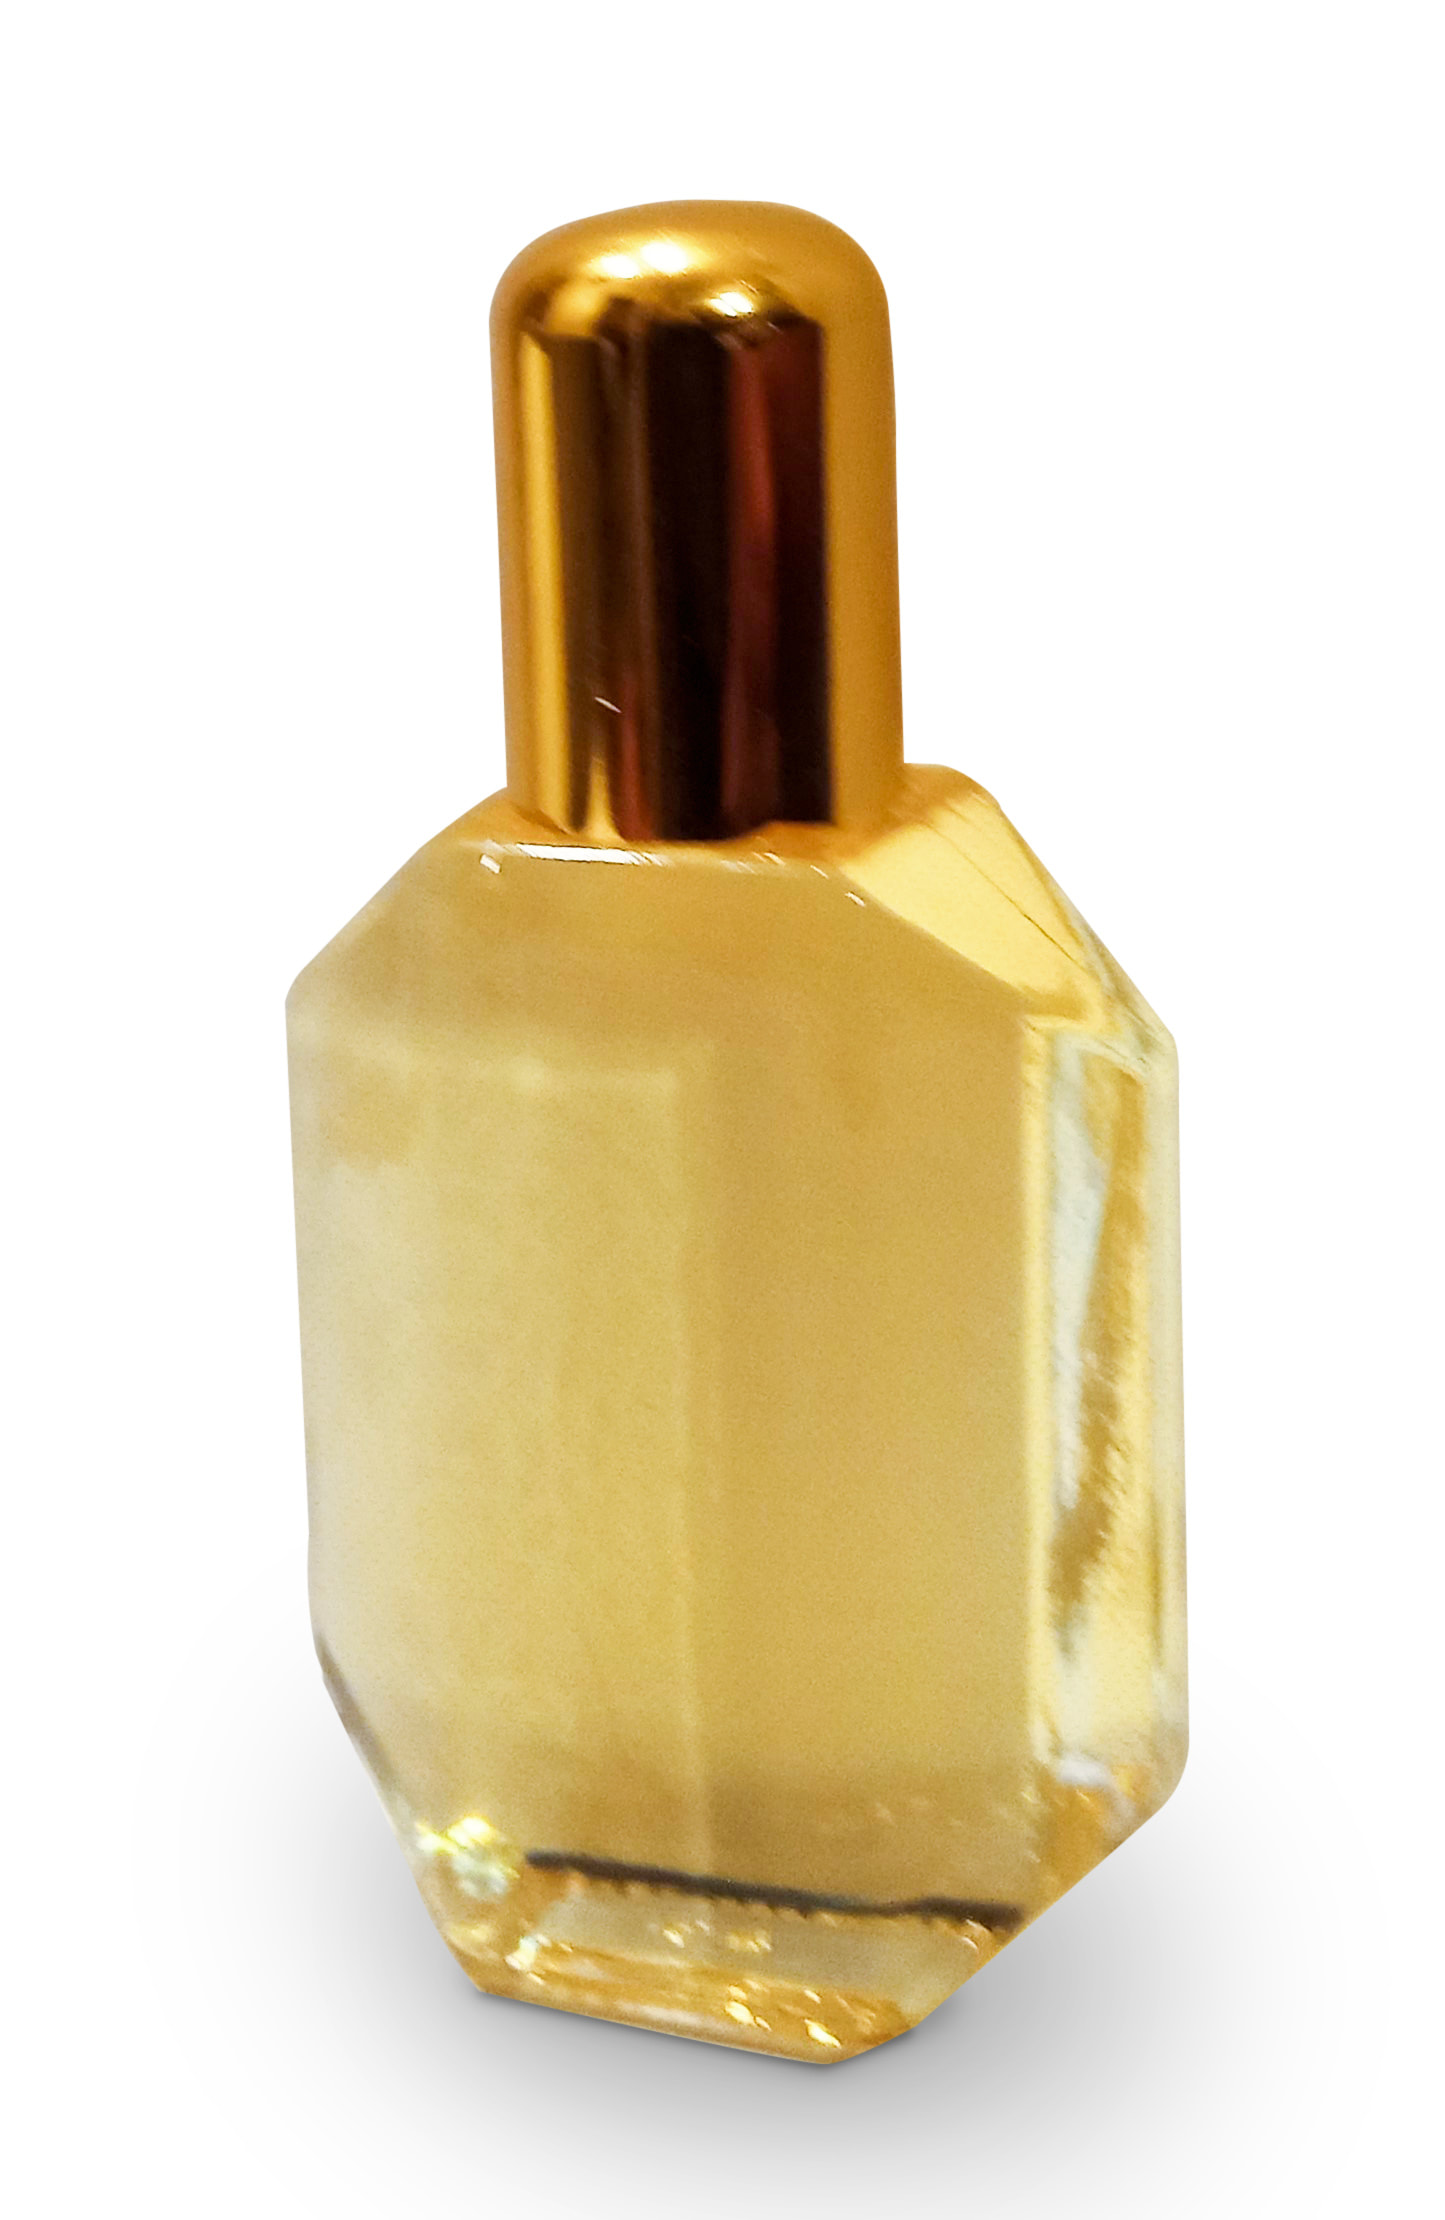 Oud & Musk -Animal Woody-Concentrated Perfume Oil - Designer Inspired